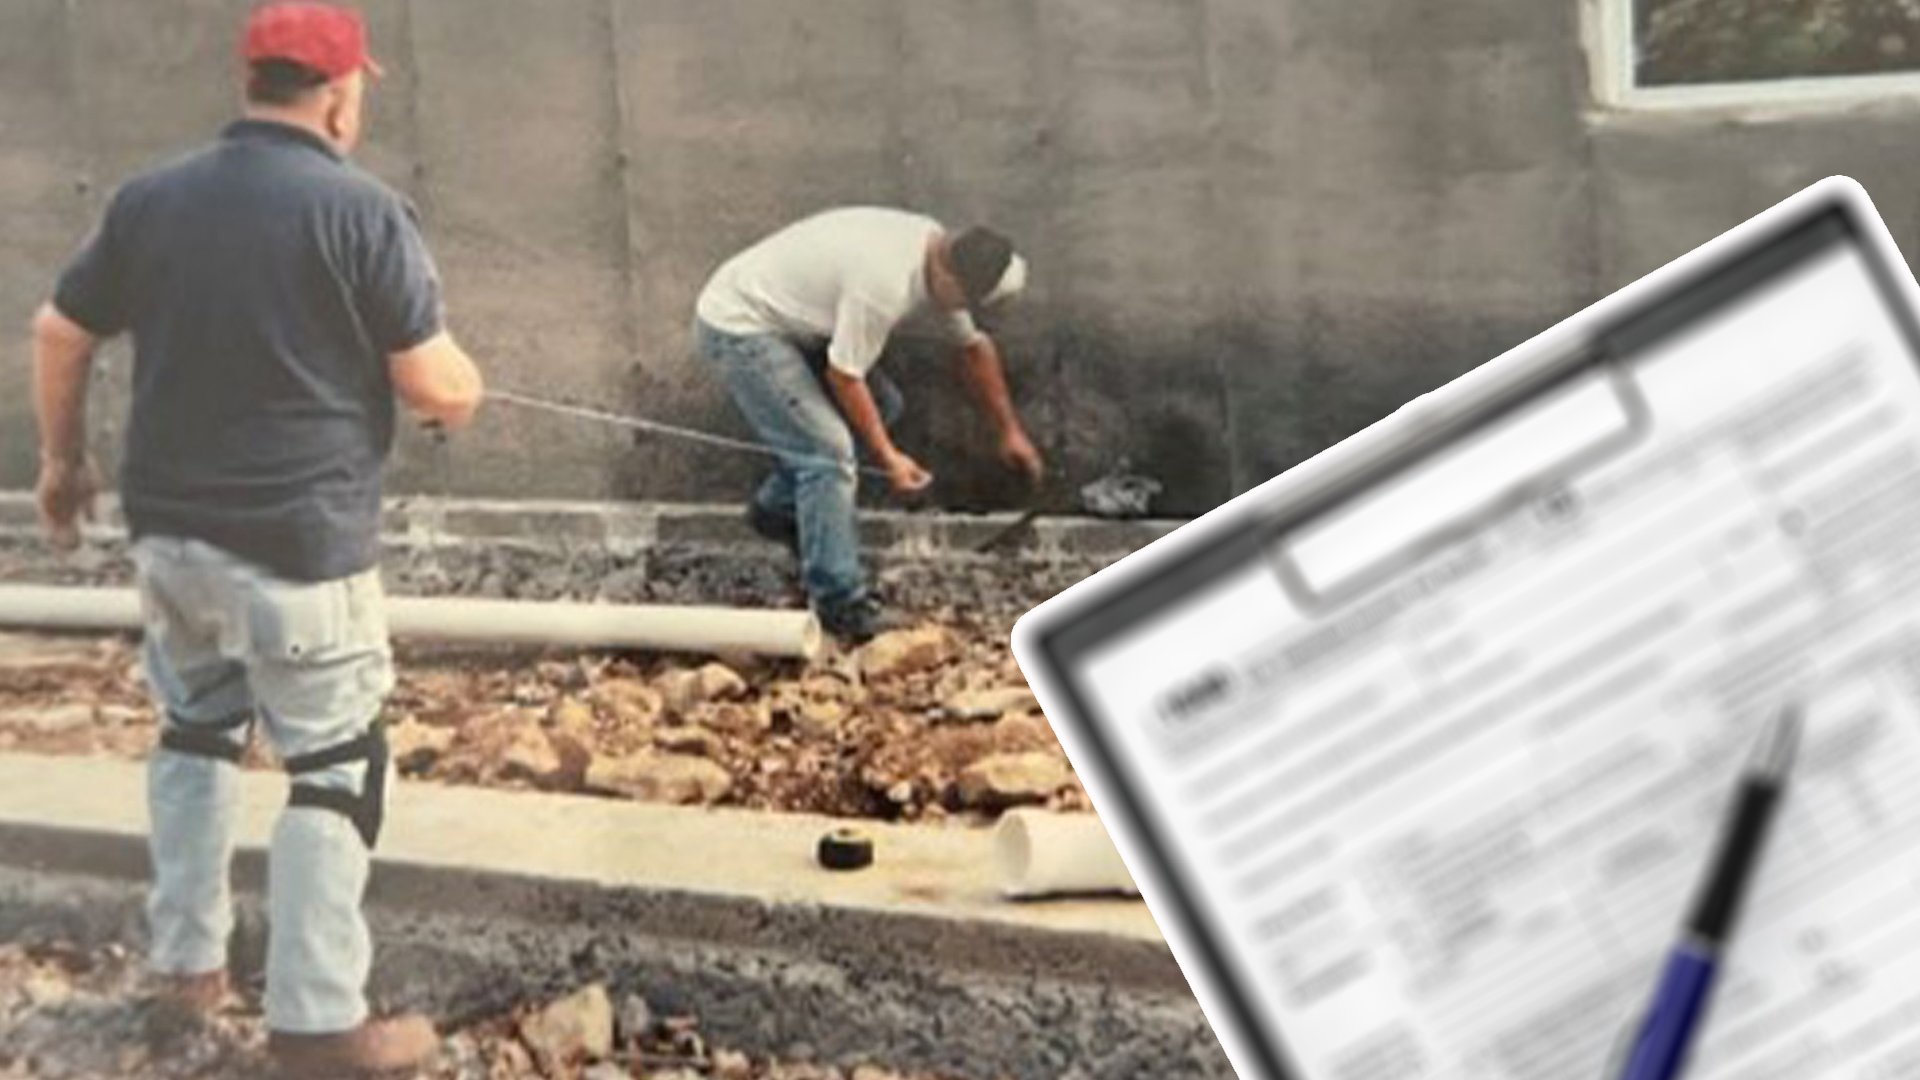 Despite claims filed with the US Department of Veterans Affairs that claimed he was permanently disabled in a 2005 car accident, former soldier Bruce Hay, right, was photographed shortly after the crash bending over while helping to build a house in Kansas. US Department of Justice photo, composite by Coffee or Die Magazine.